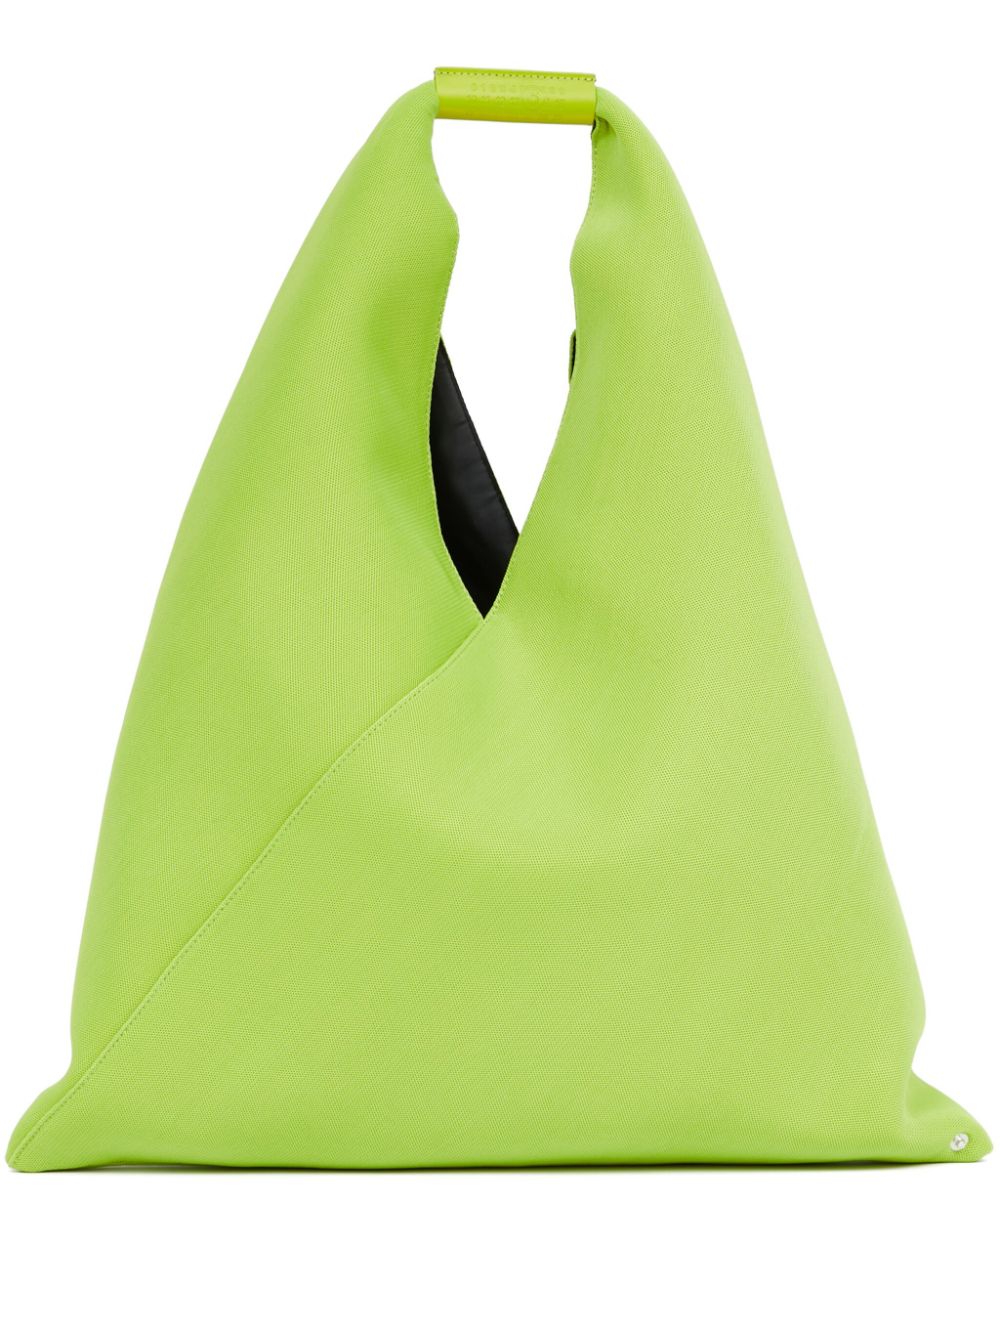 Neon green Classic Japanese tote bag